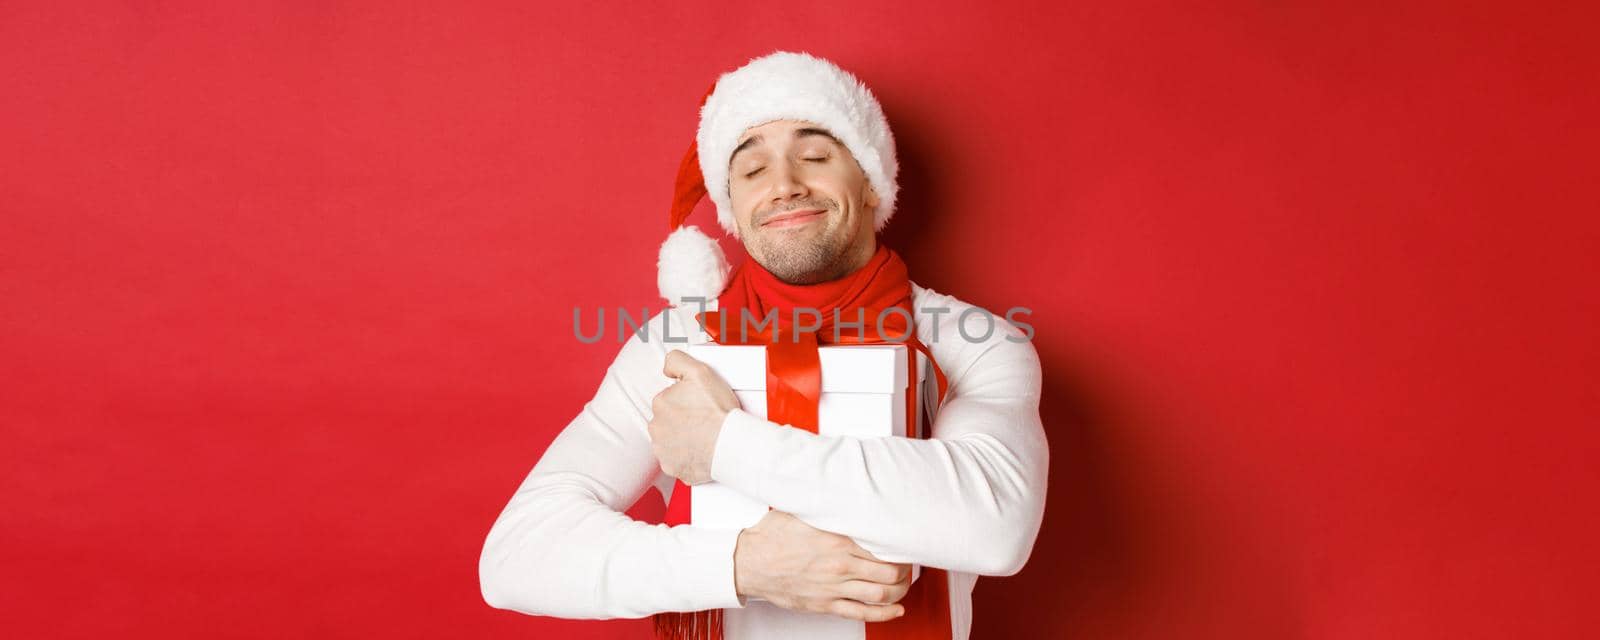 Concept of winter holidays, christmas and lifestyle. Image of lovely guy in santa hat and scarf, hugging his new year present and smiling flattered, standing over red background. Copy space